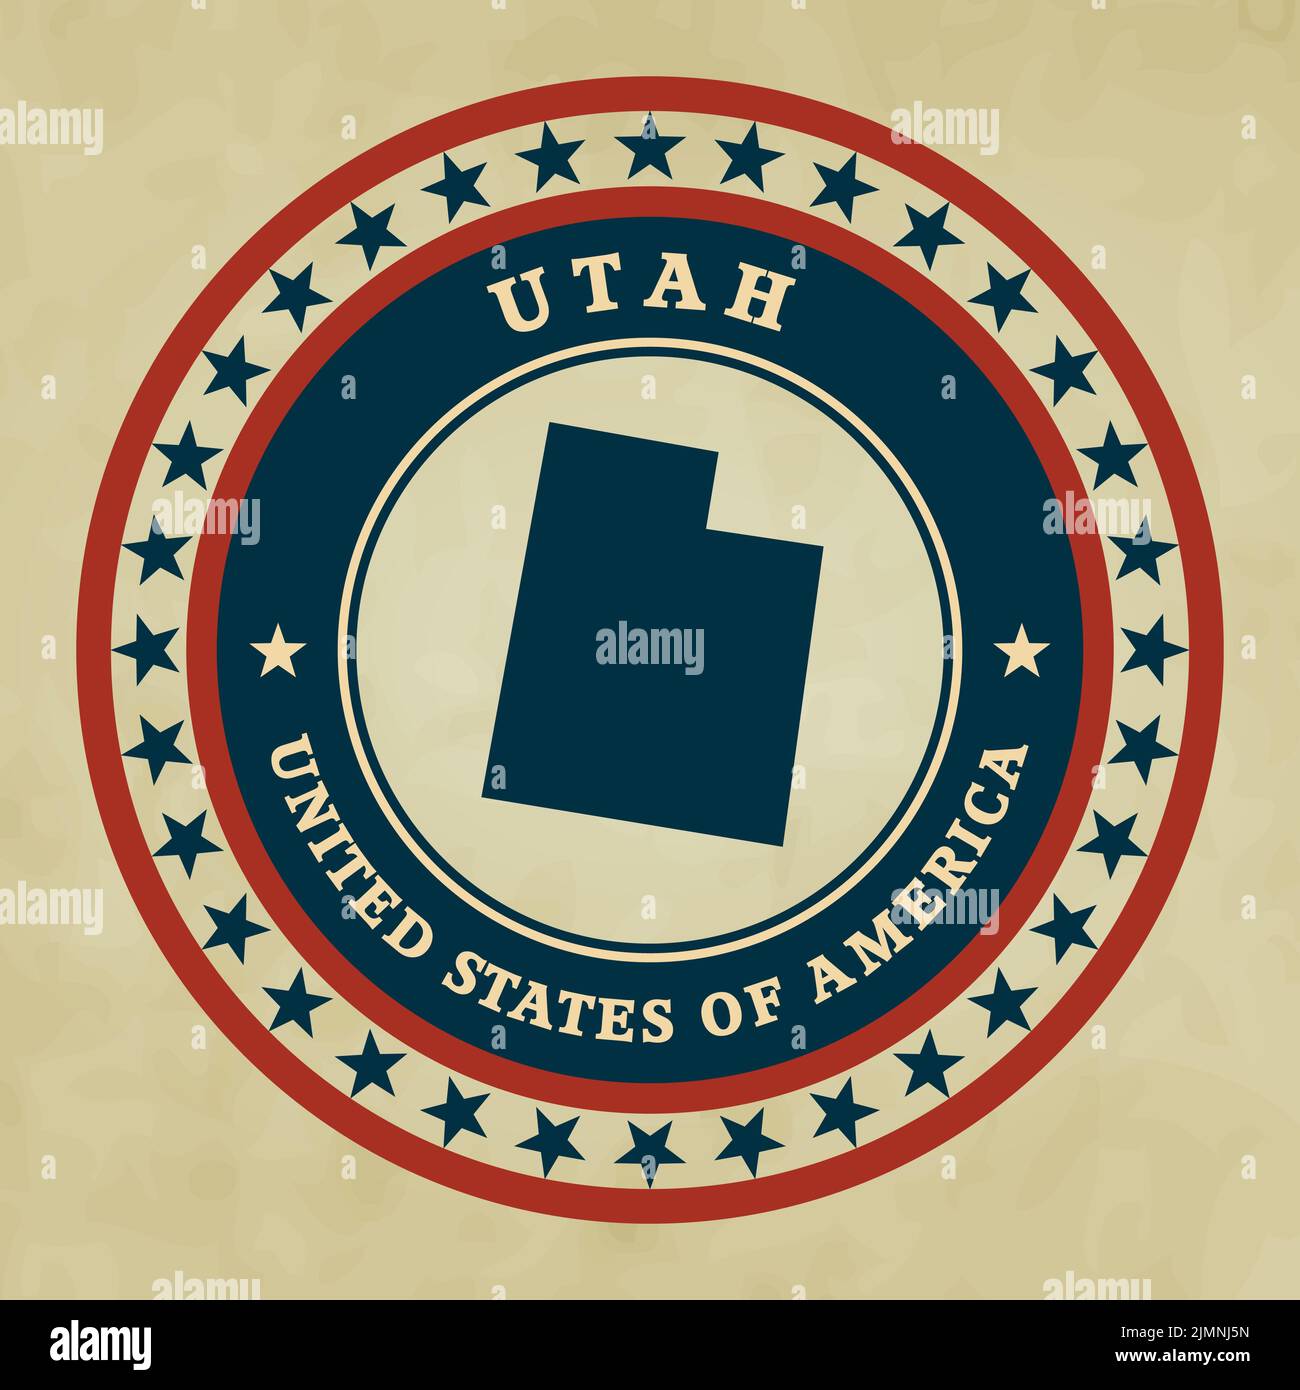 Vintage label with map of Utah Stock Photo